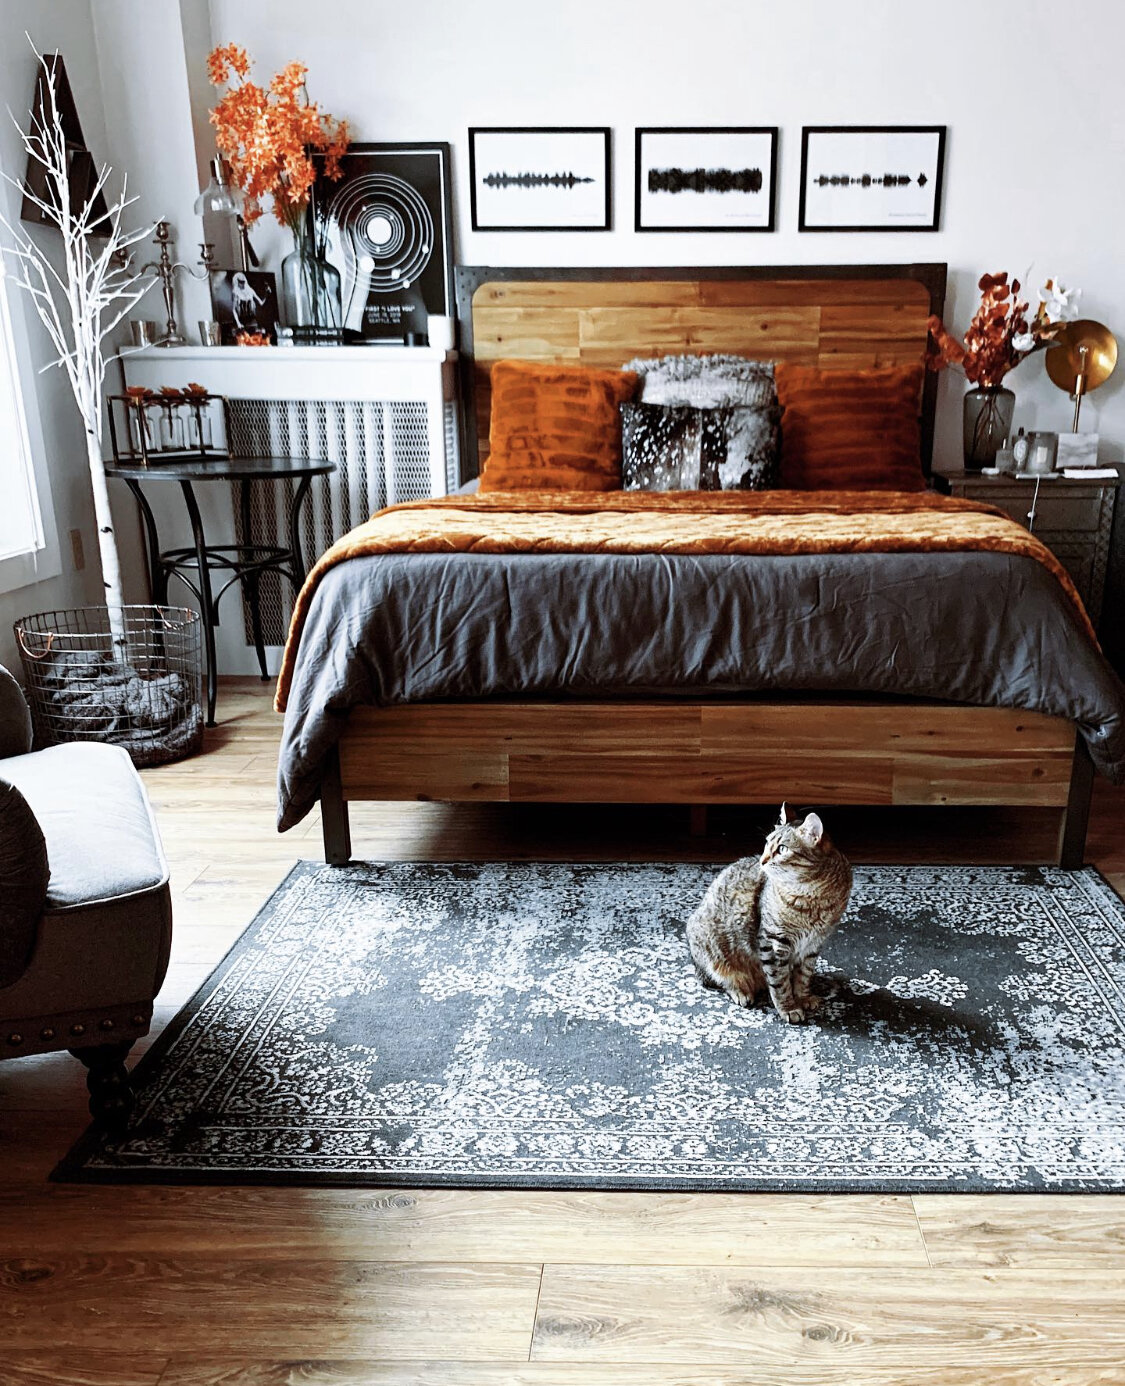 Apartment Decorating: Classic Style on a Budget - Stuffy Muffy